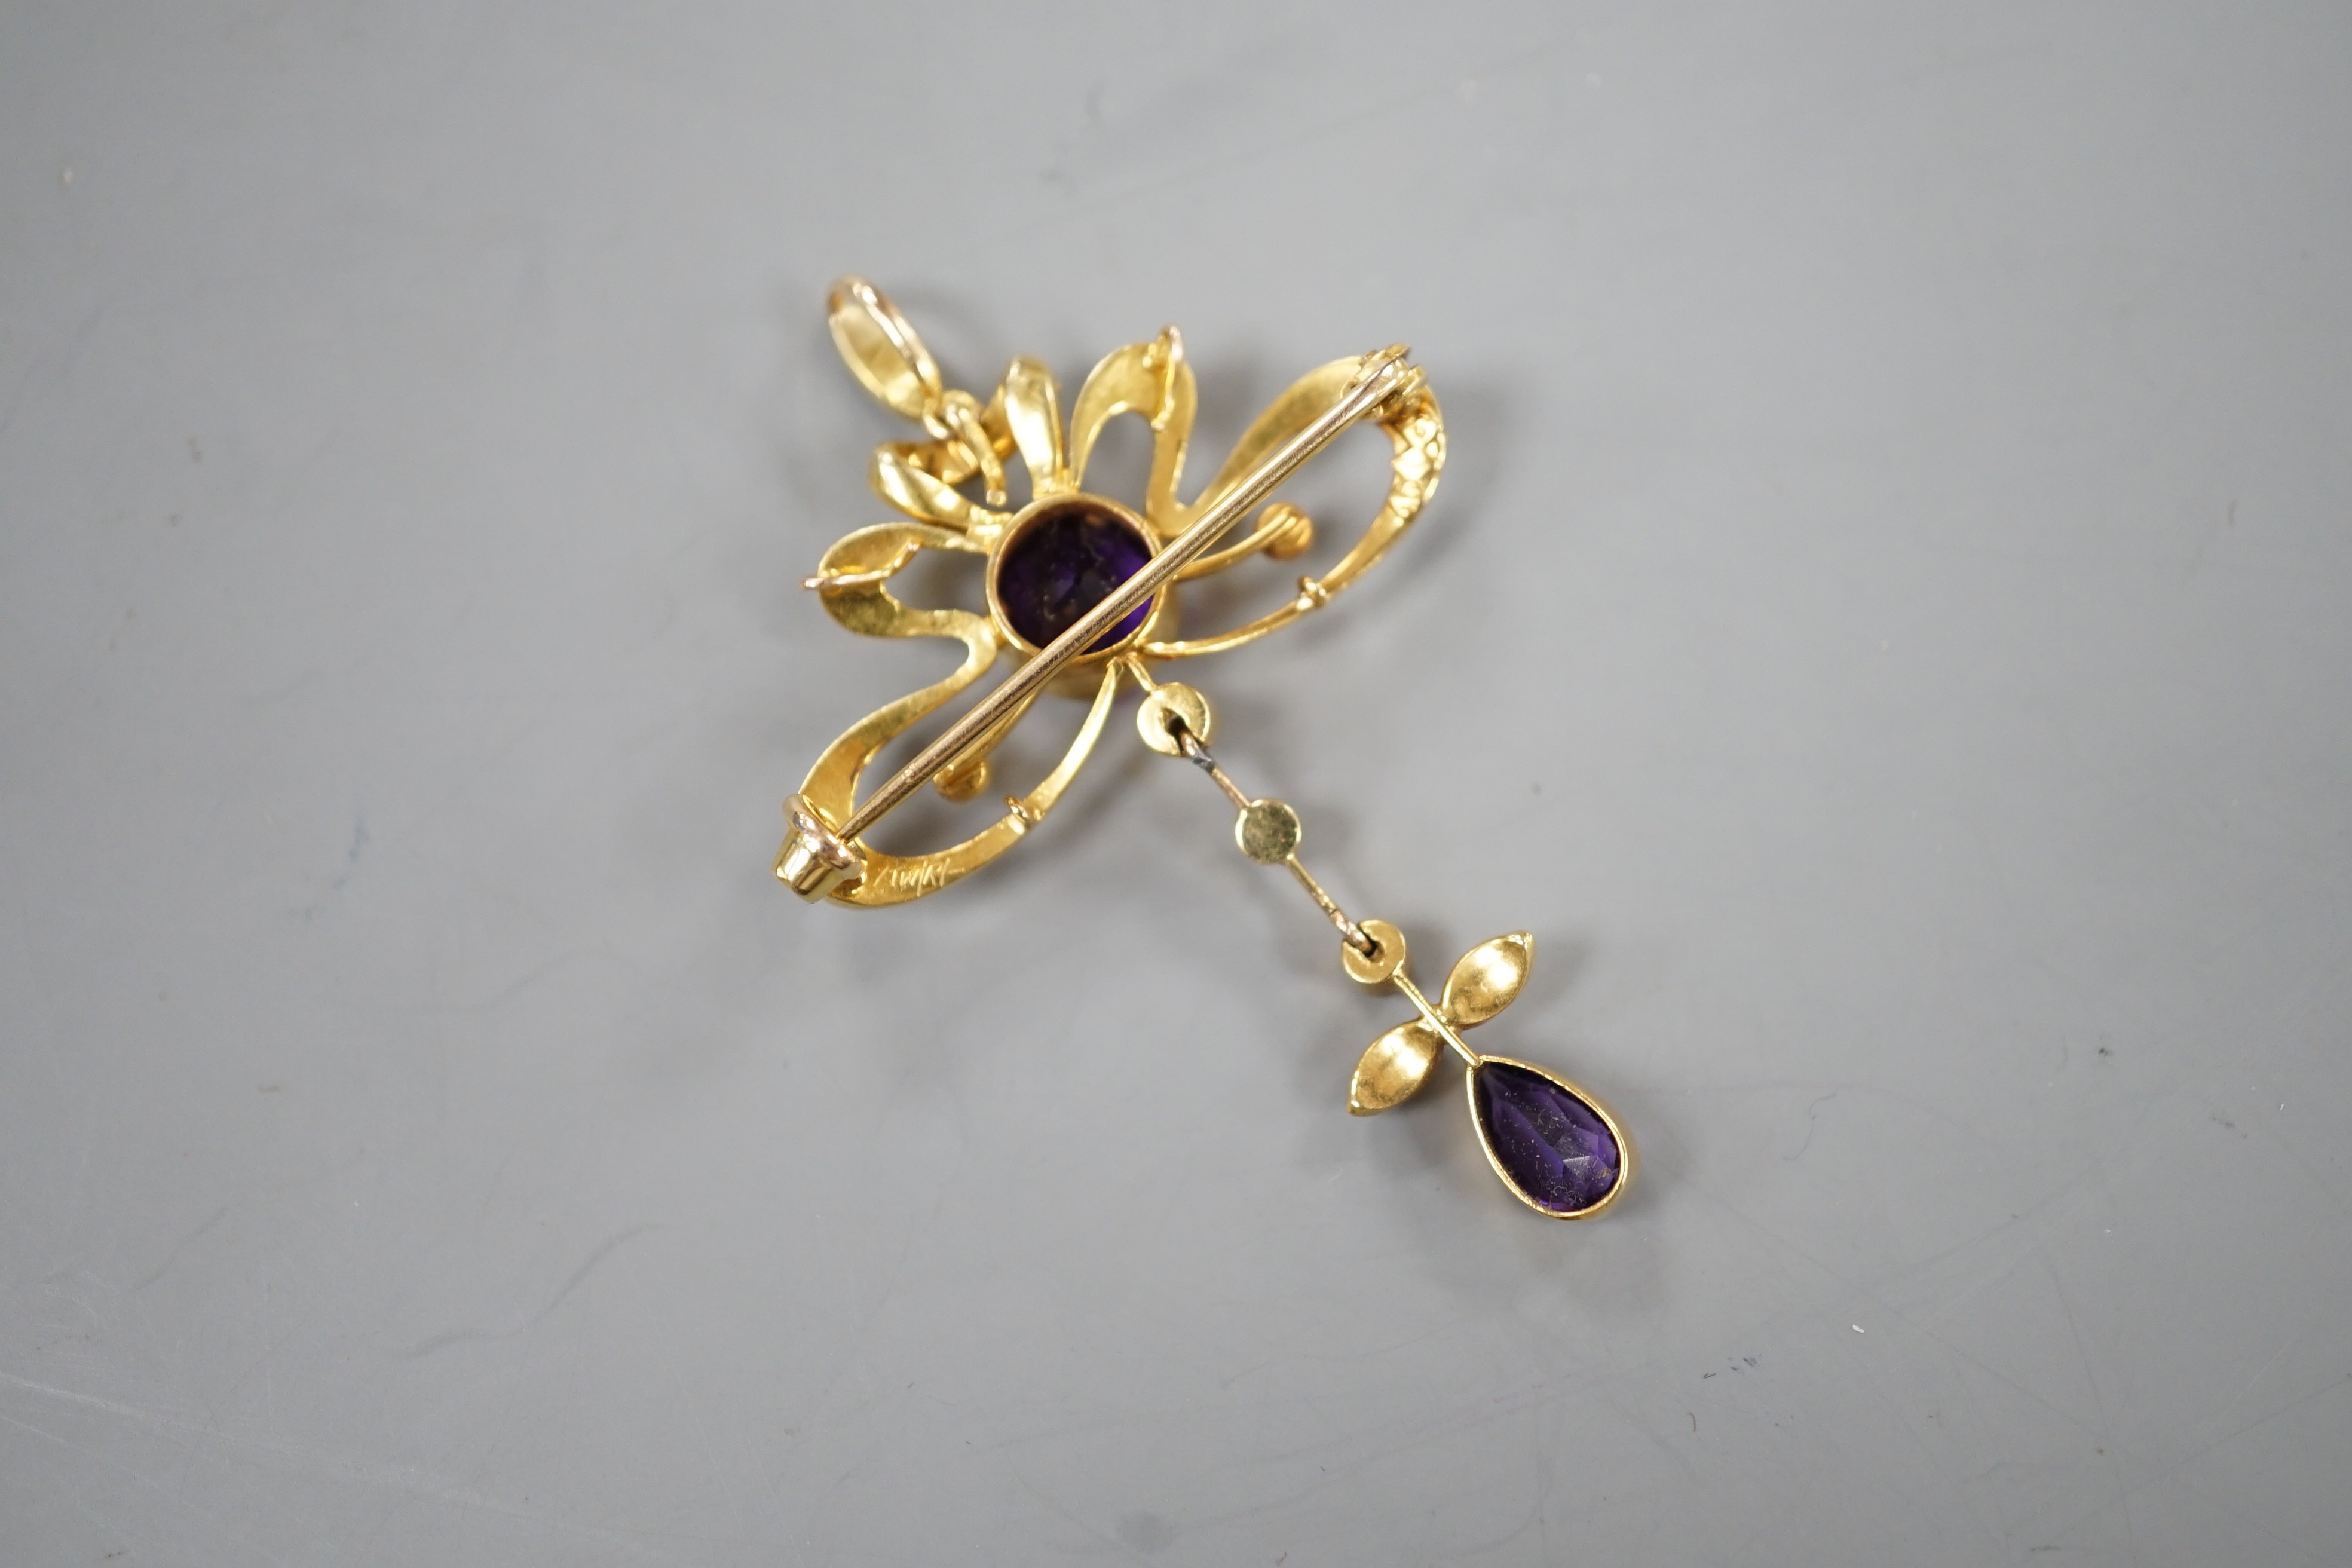 An Edwardian 15ct, amethyst and seed pearl set drop pendant brooch, overall 49mm, gross weight 5.3 grams.